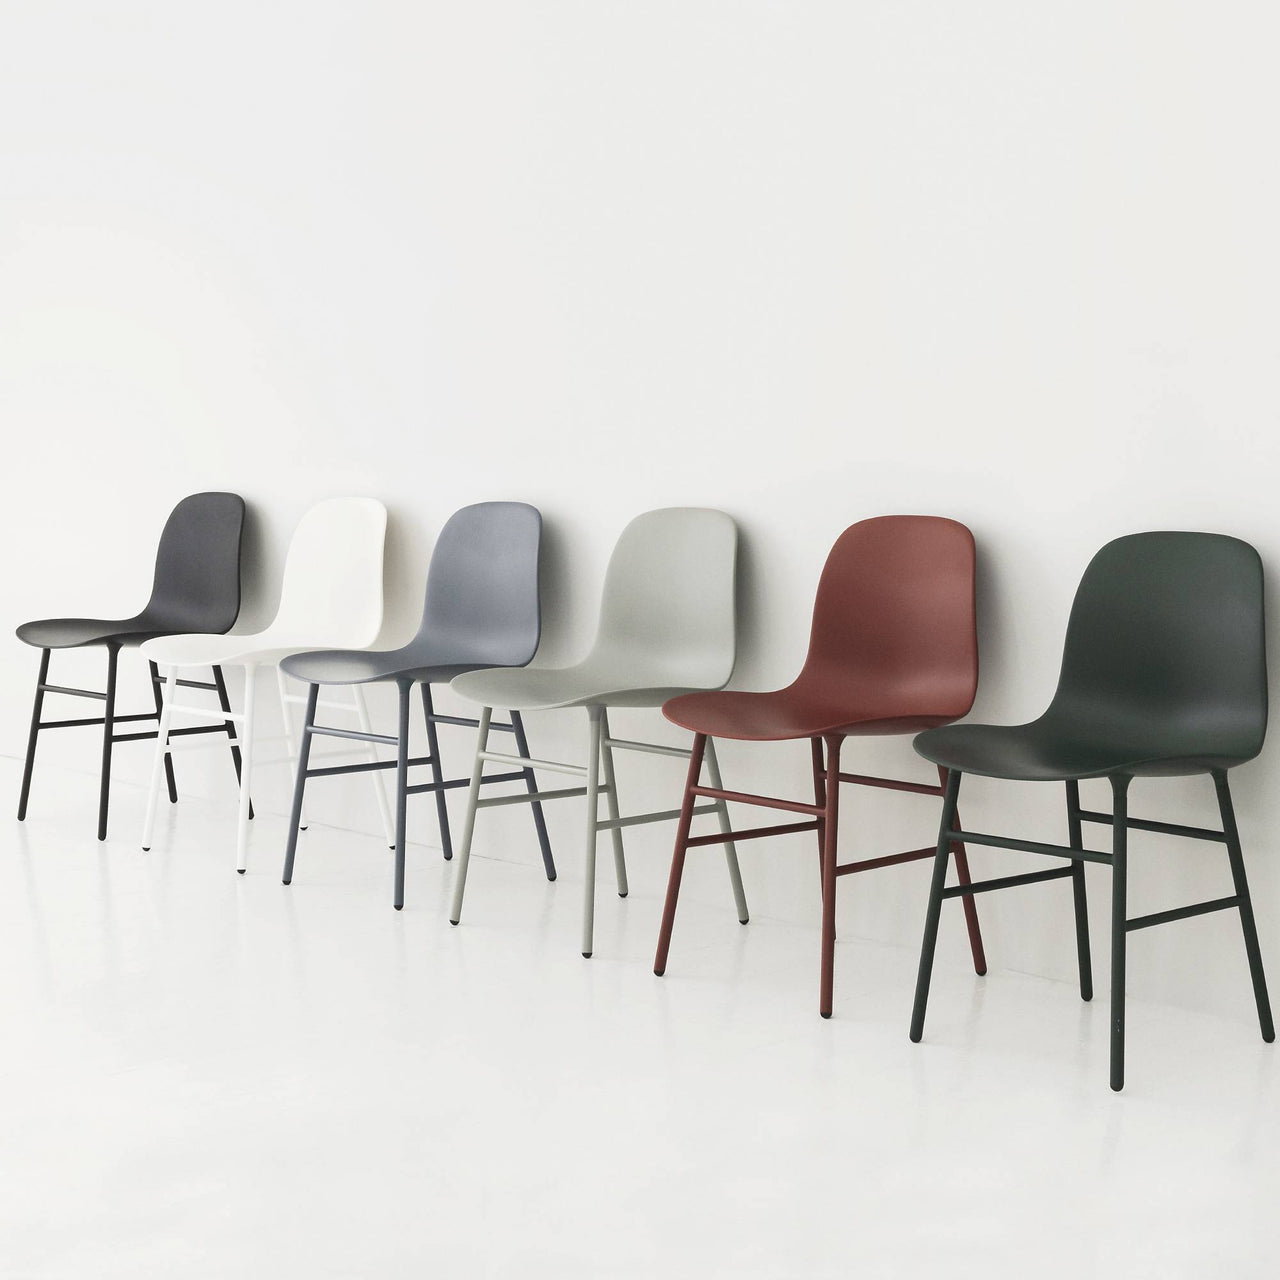 Form Chair: Steel